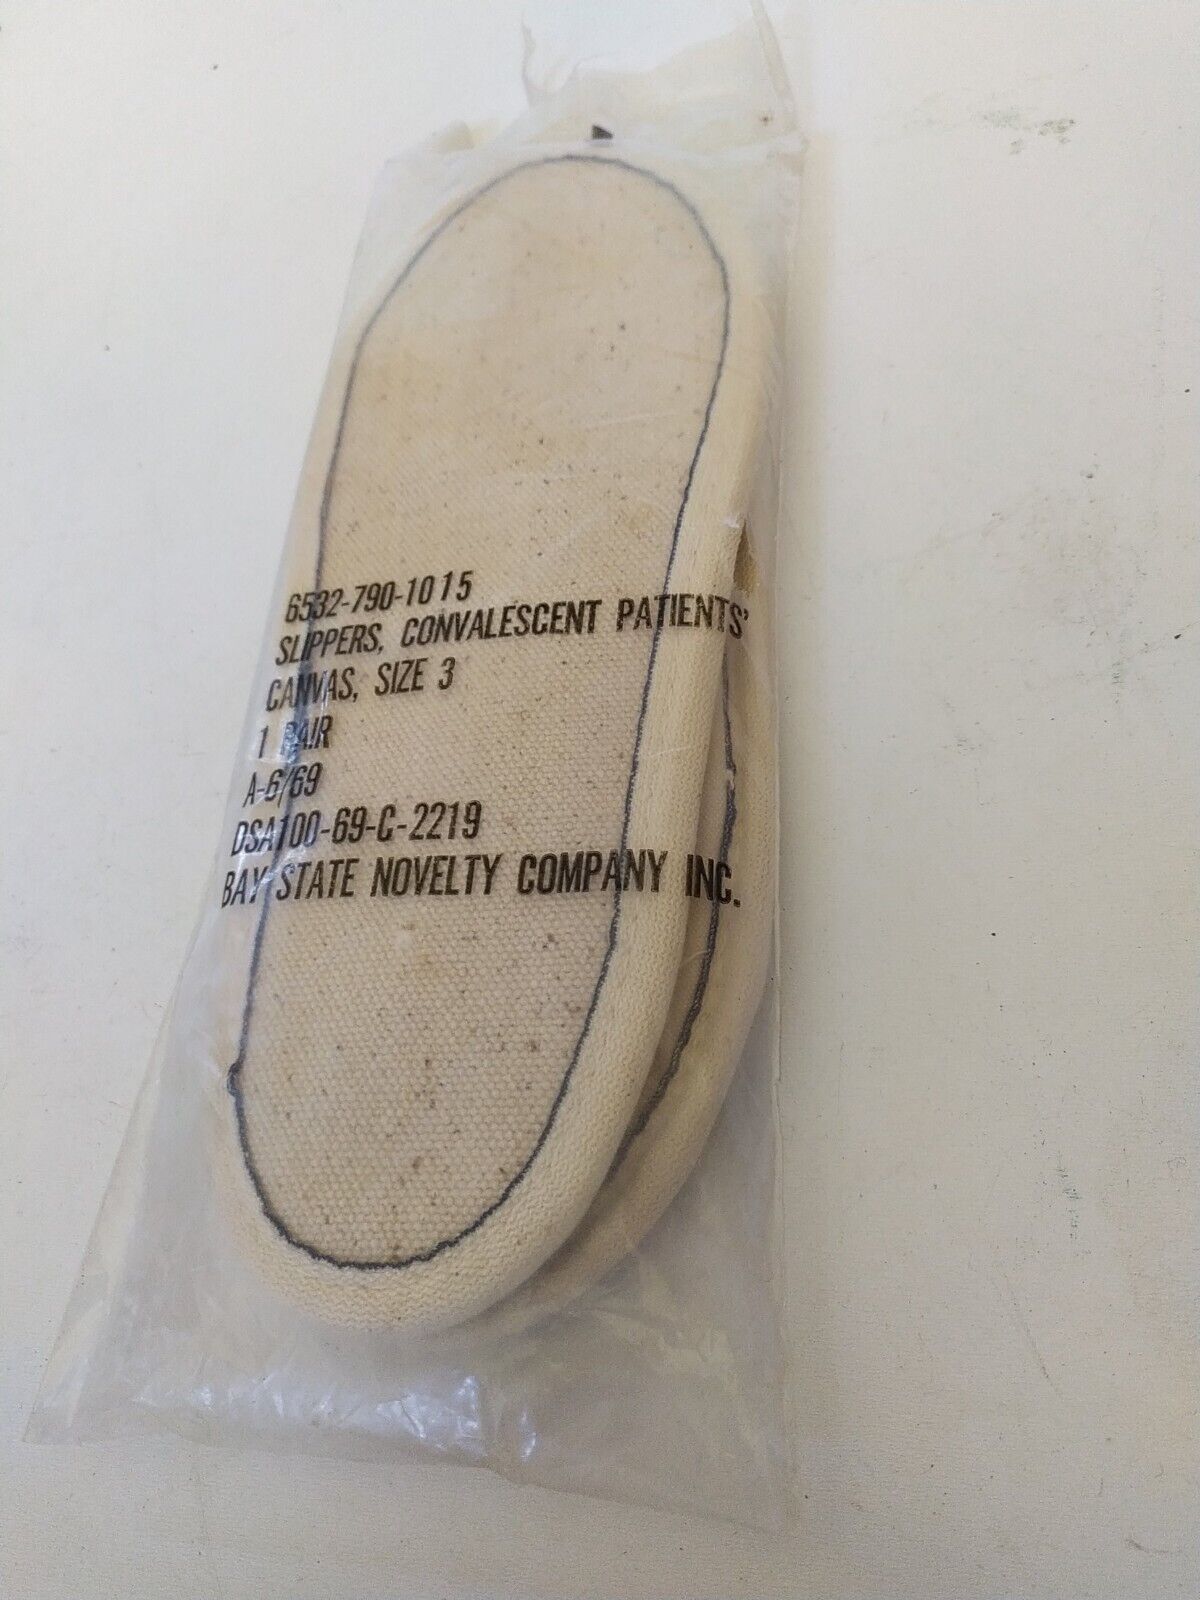 Vietnam US Army Medical Corps Slippers, A-6/69, in original package. Authentic.